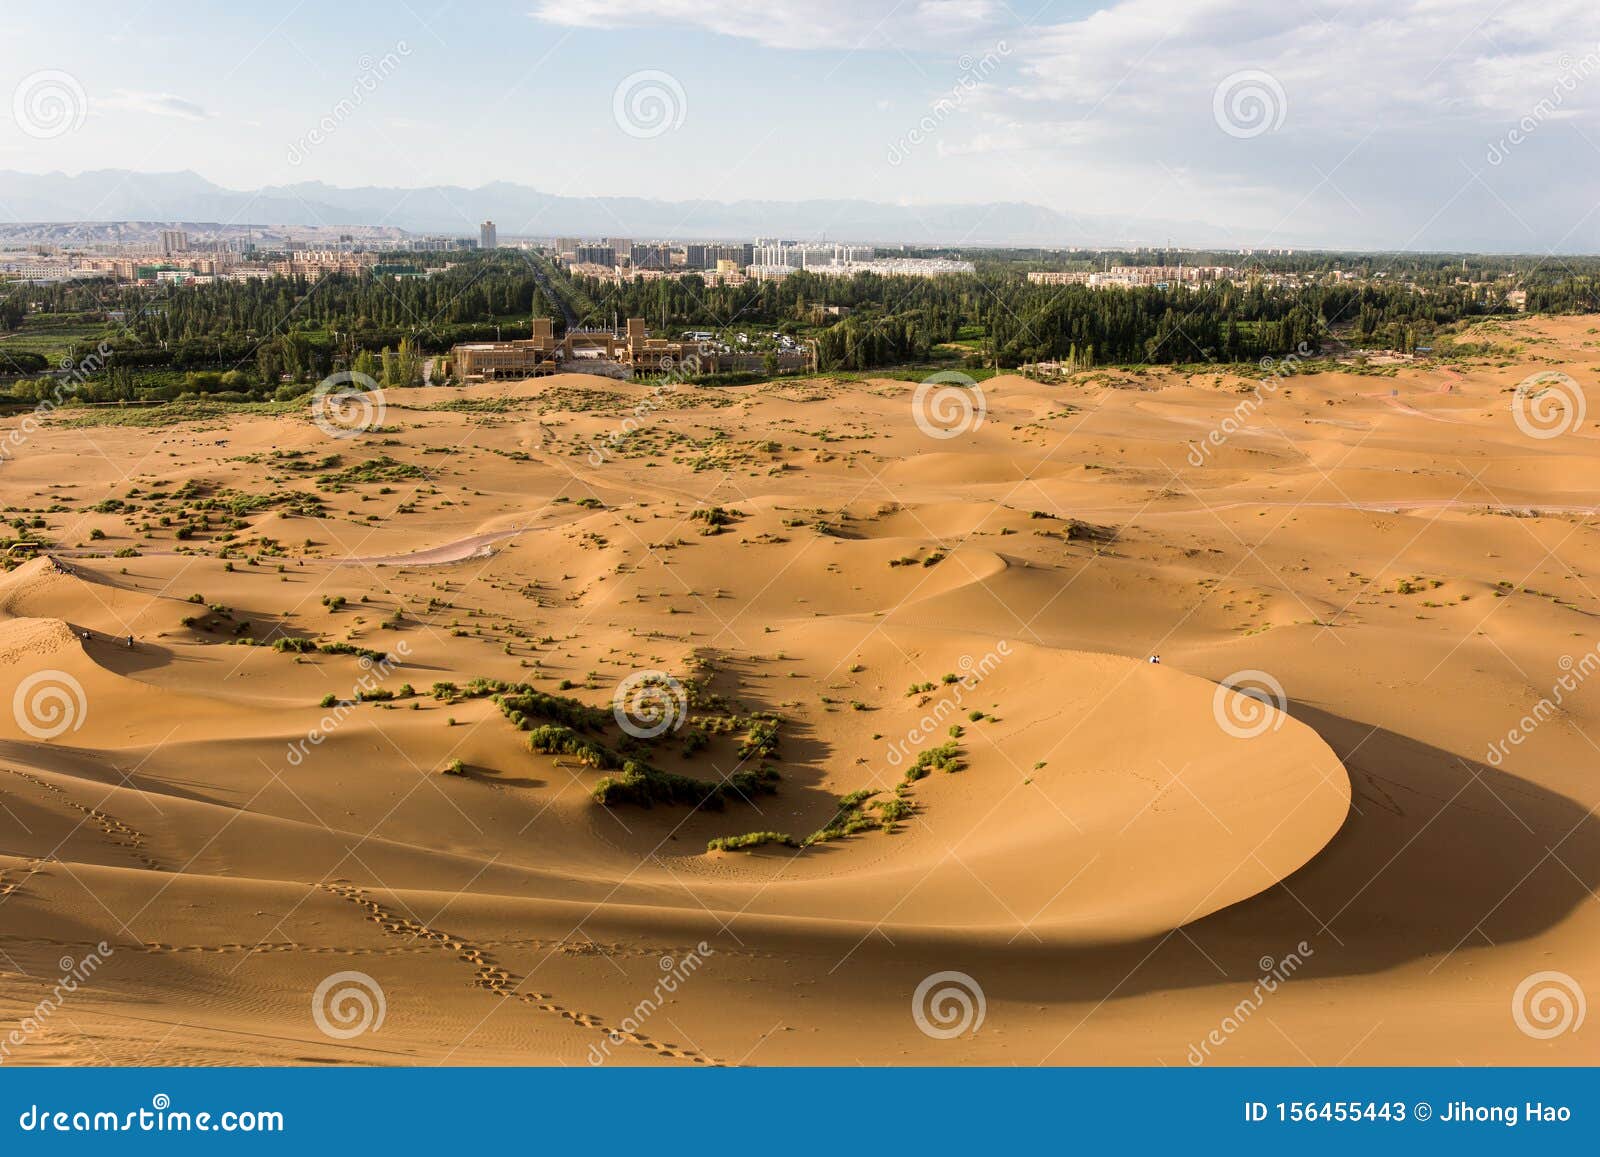 the kumutage desert in xinjiang, china, the desert closest to the city